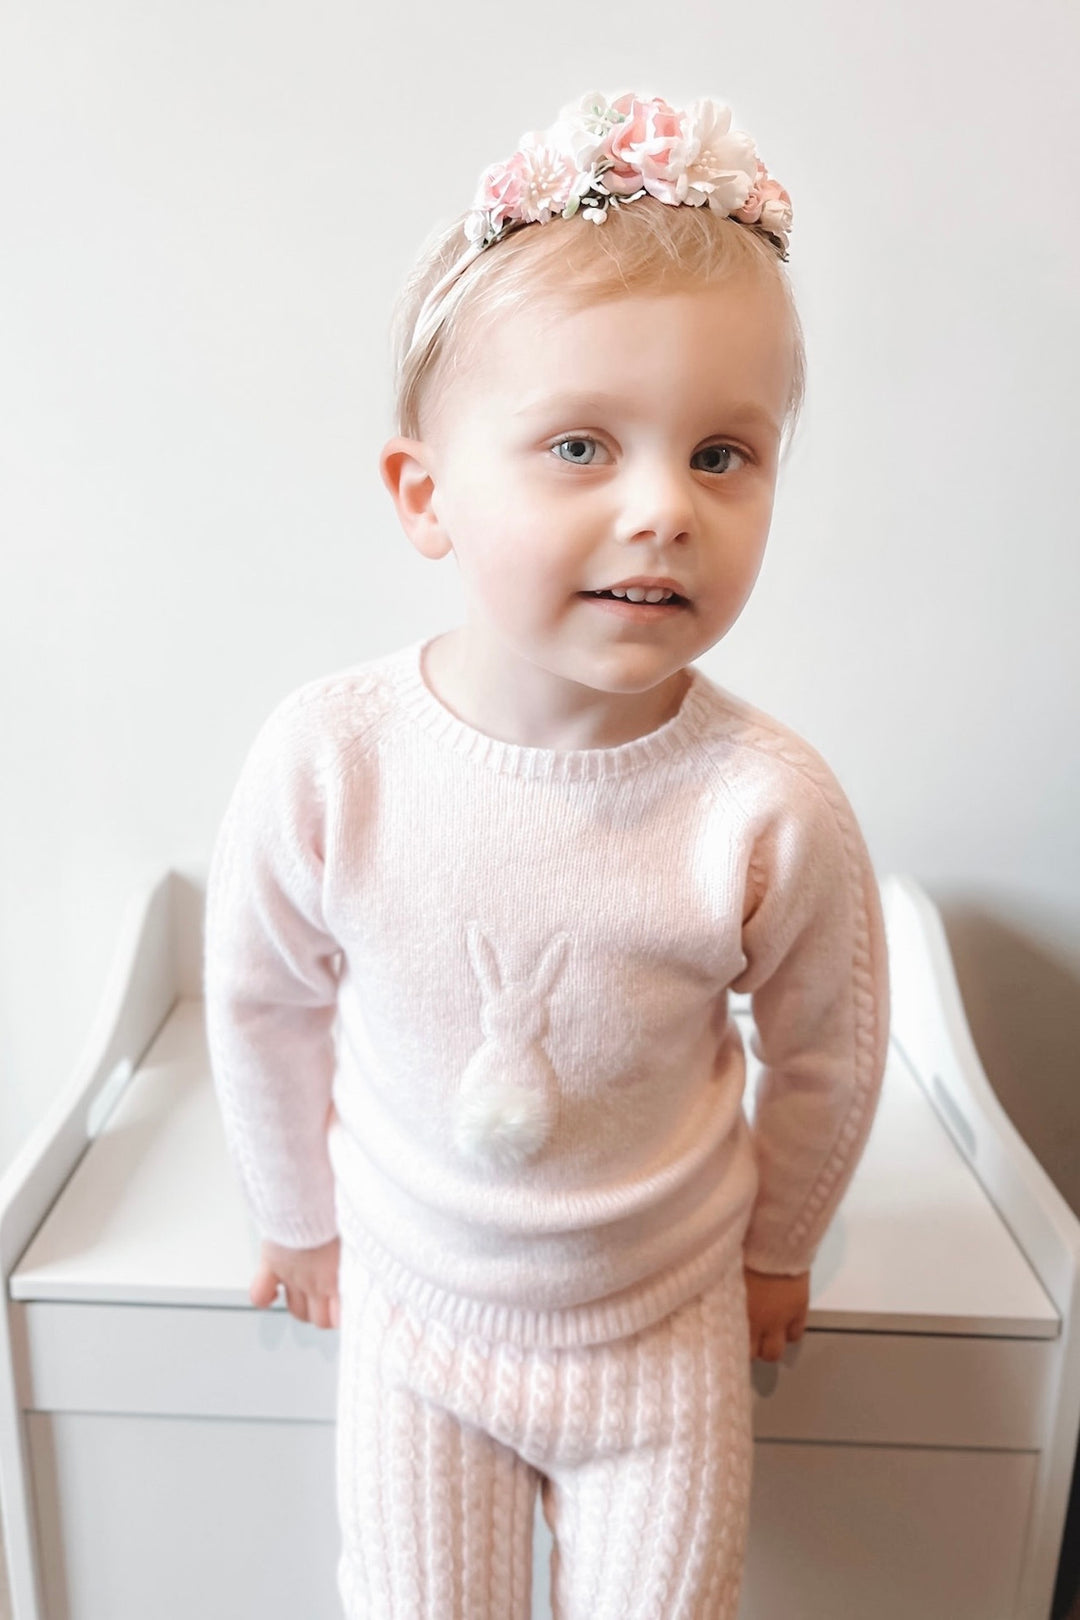 Wedoble "Cloud" Cashmere Bunny Top & Leggings | Millie and John